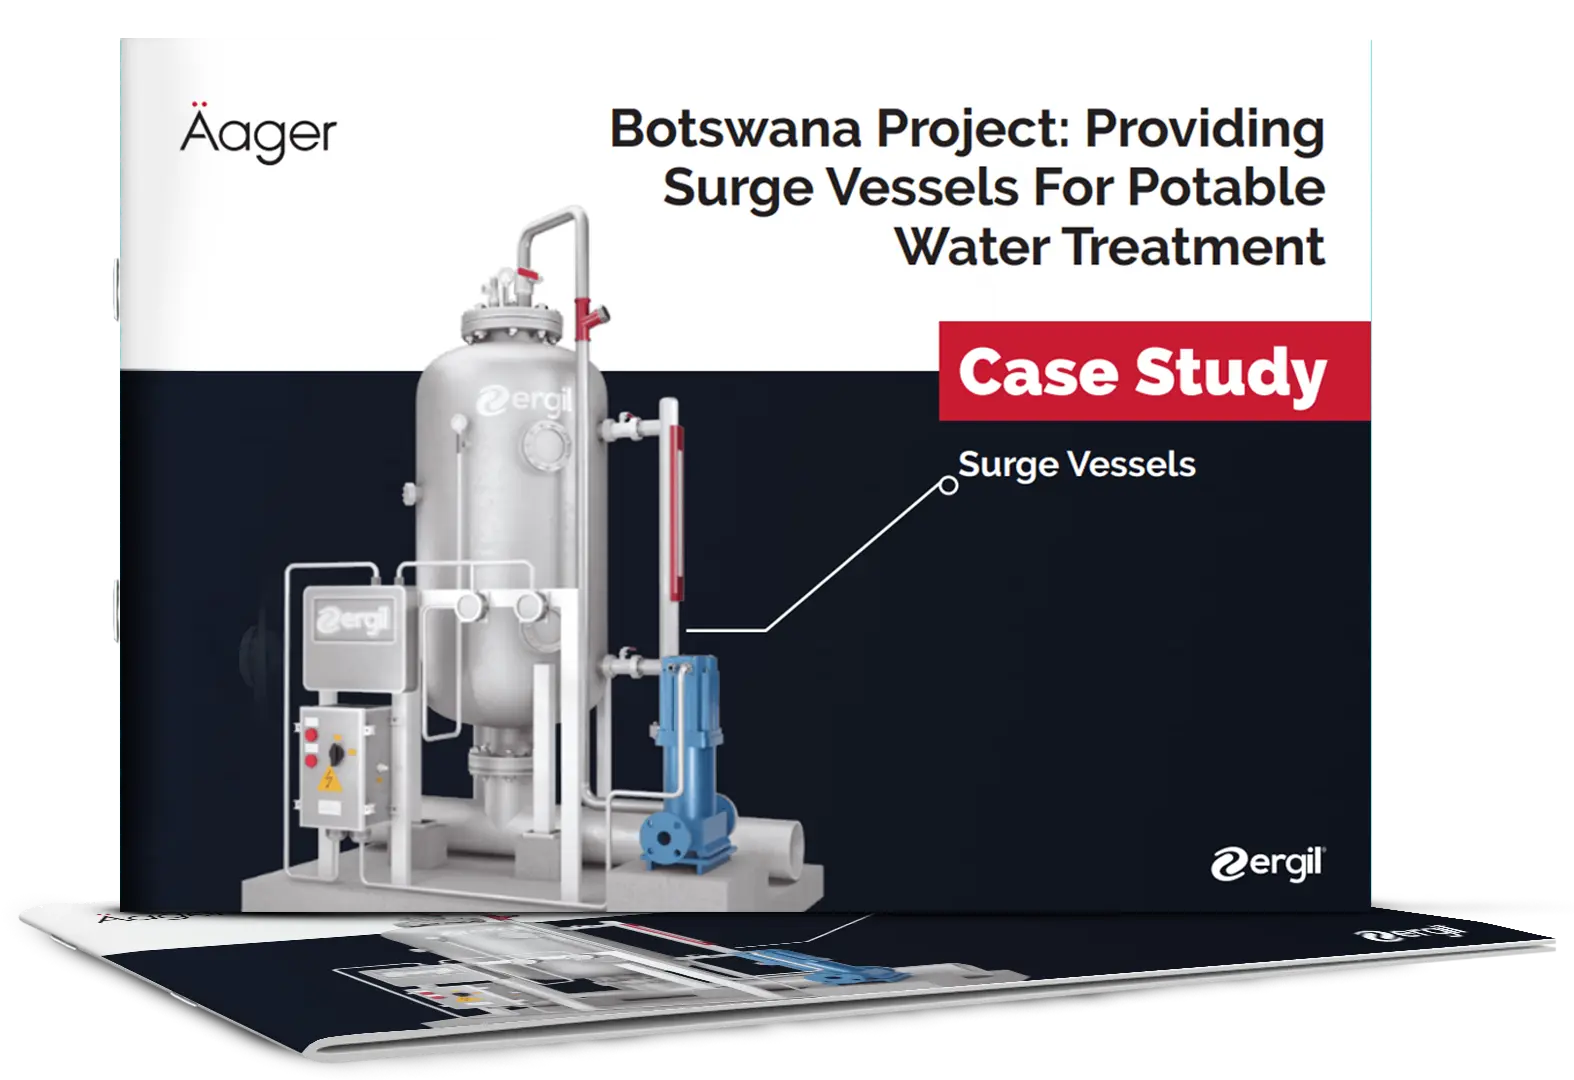 Botswana Project: Providing Surge Vessels for Potable Water Treatment 30